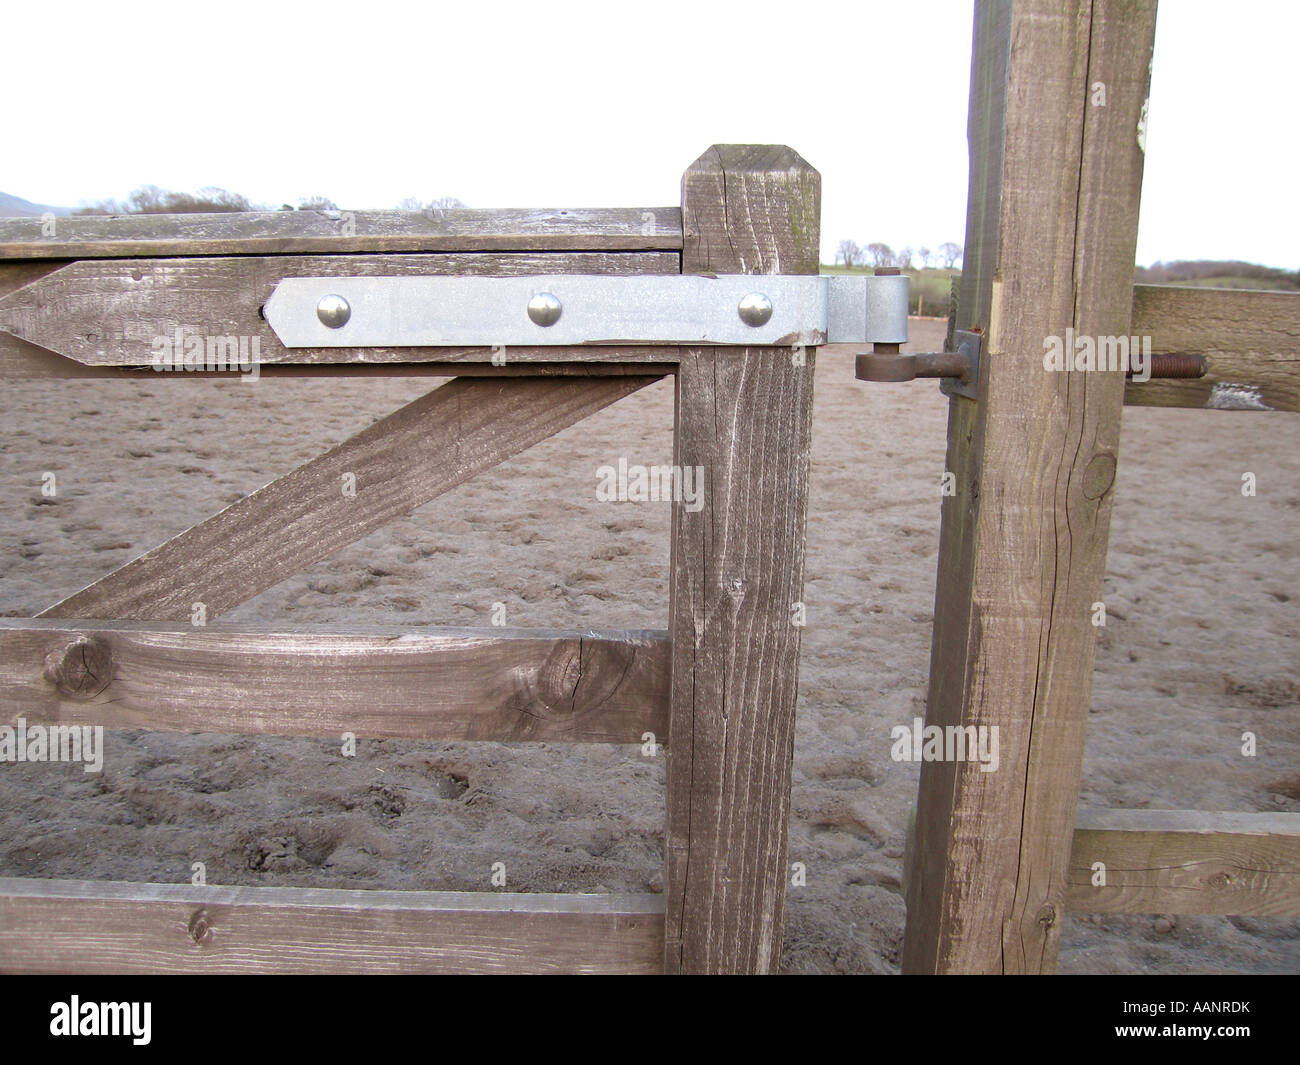 FARM GATE FIELD GATES HINGES 19mm HOOKS TO DRIVE FOR WOODEN GATE FENCE POSTS 